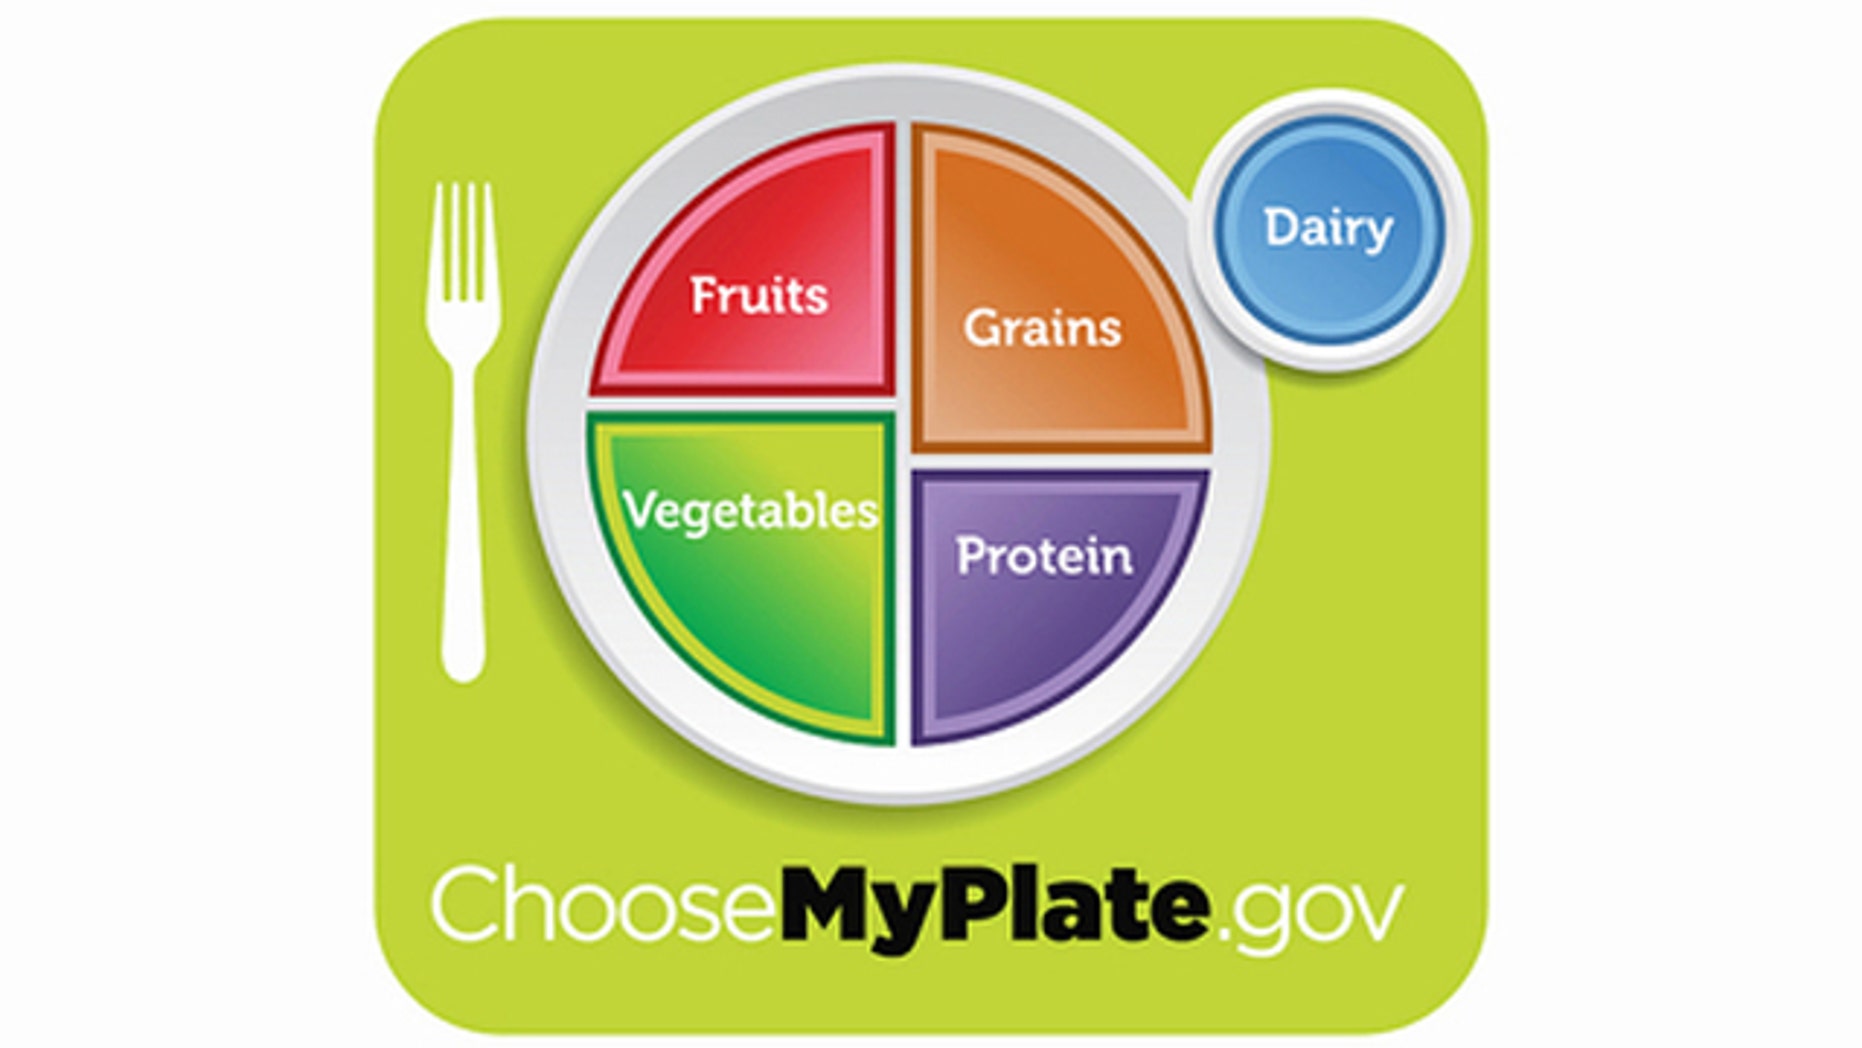 Usda Food Pyramid 2020 / What is the food pyramid? Wis Up The food